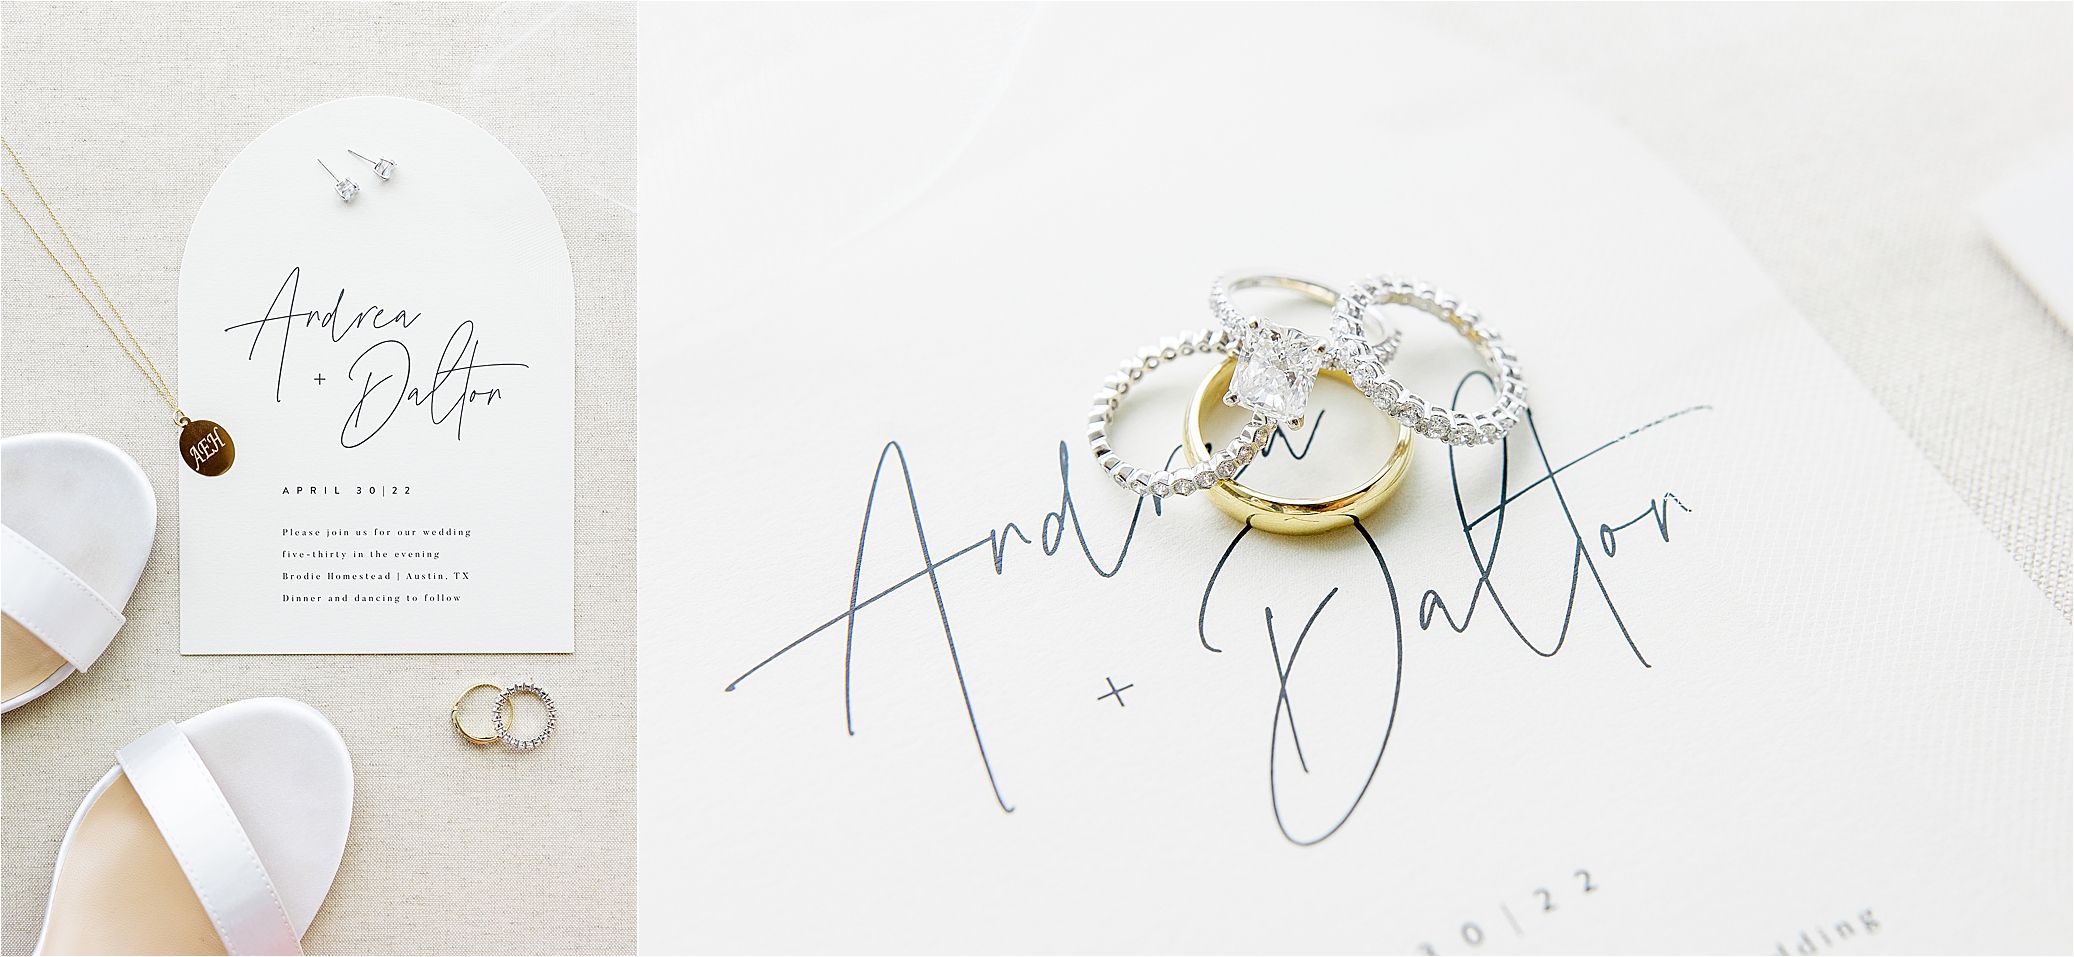 A detail photo of of wedding bands and an engagement ring on an top of an invitation suite that reads Andrea + Dalton